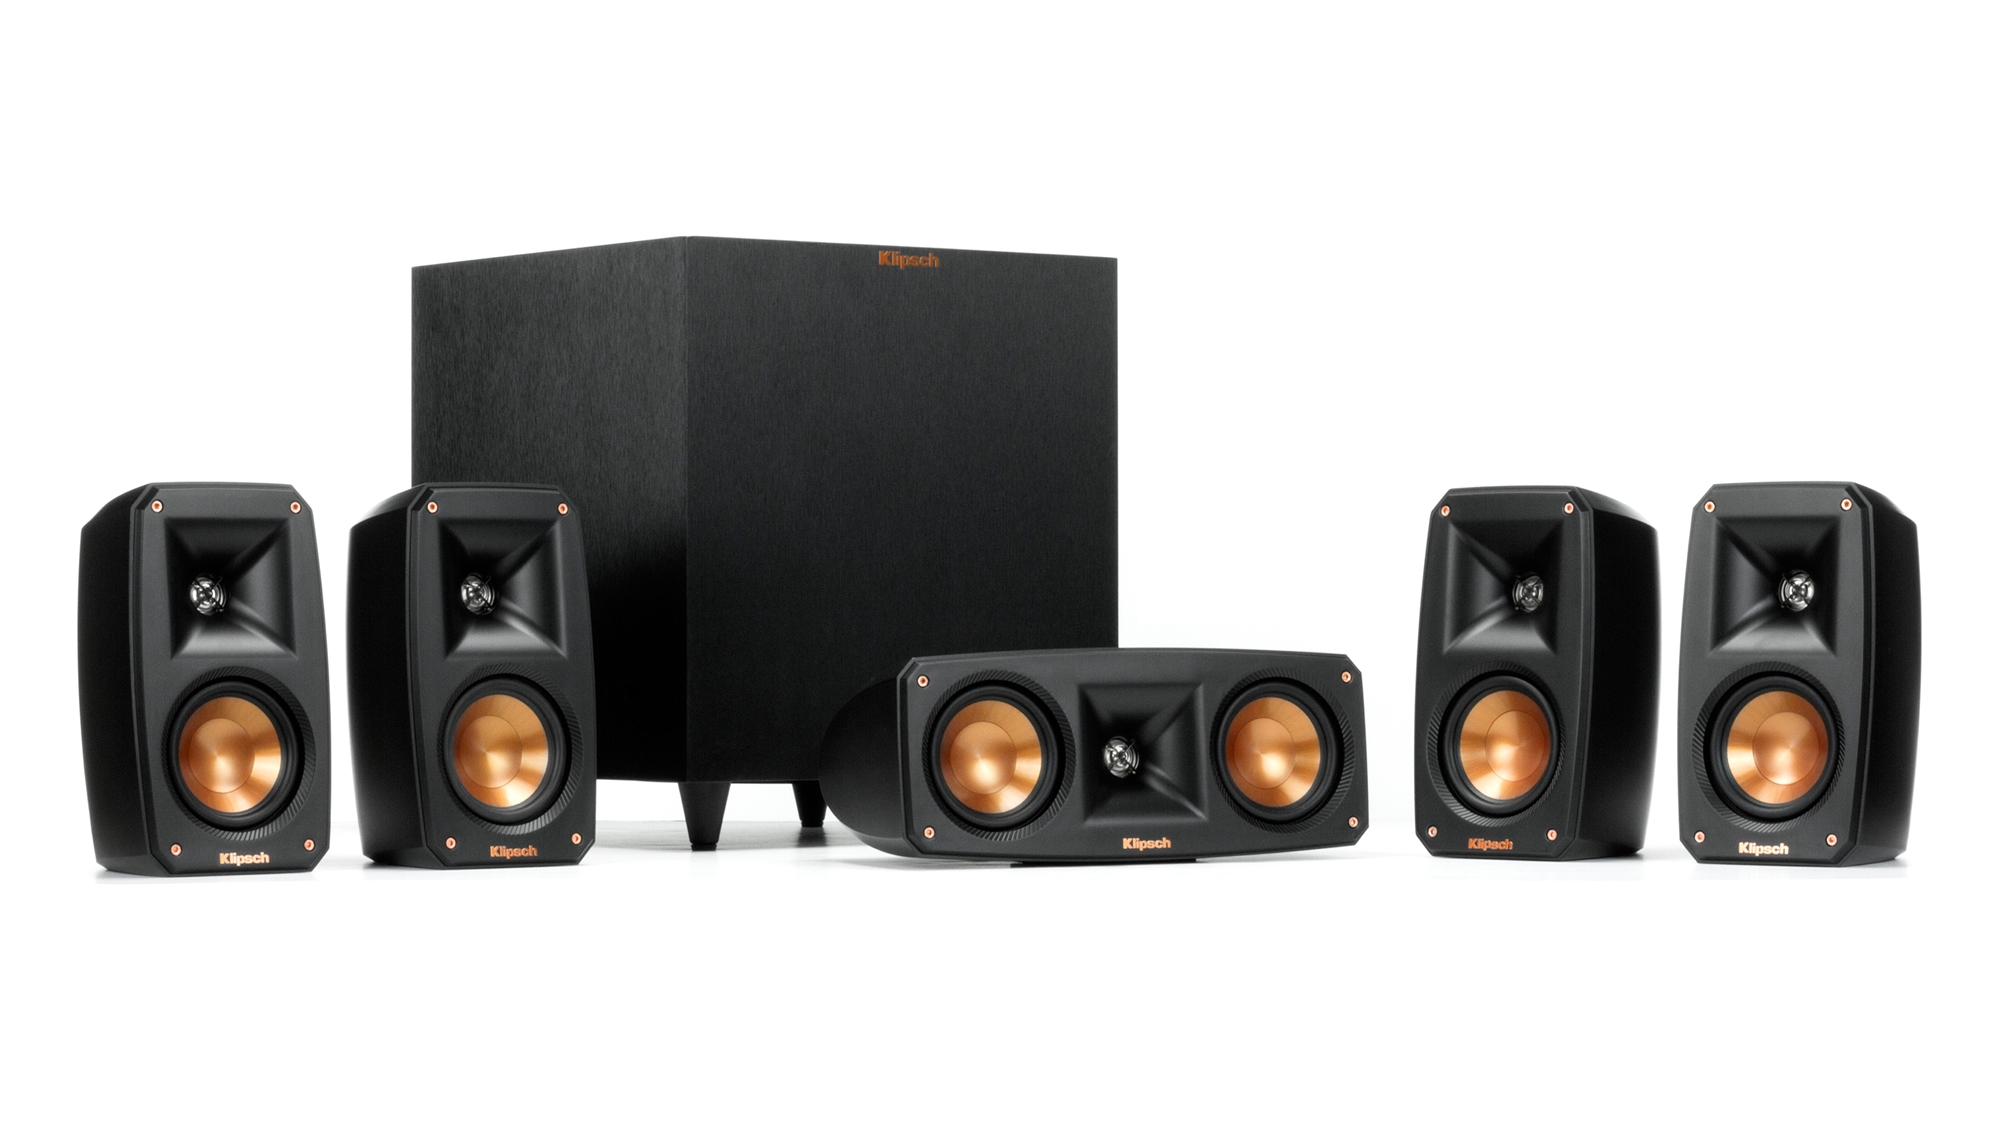 Klipsch Reference Theater Pack